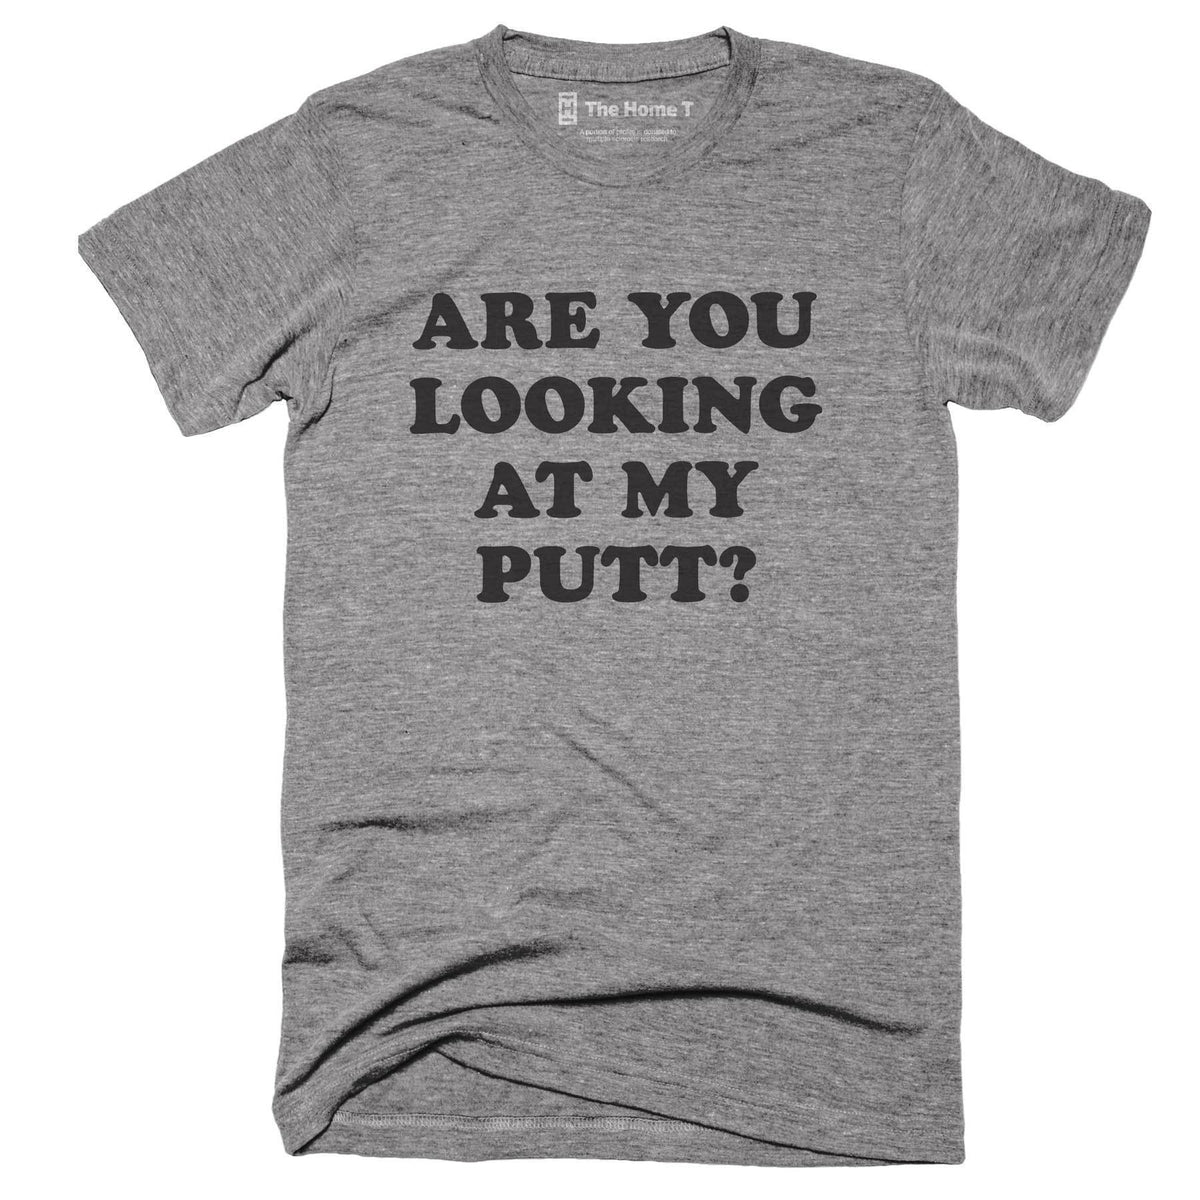 Are You Looking At My Putt? Crew neck The Home T XS Athletic Grey